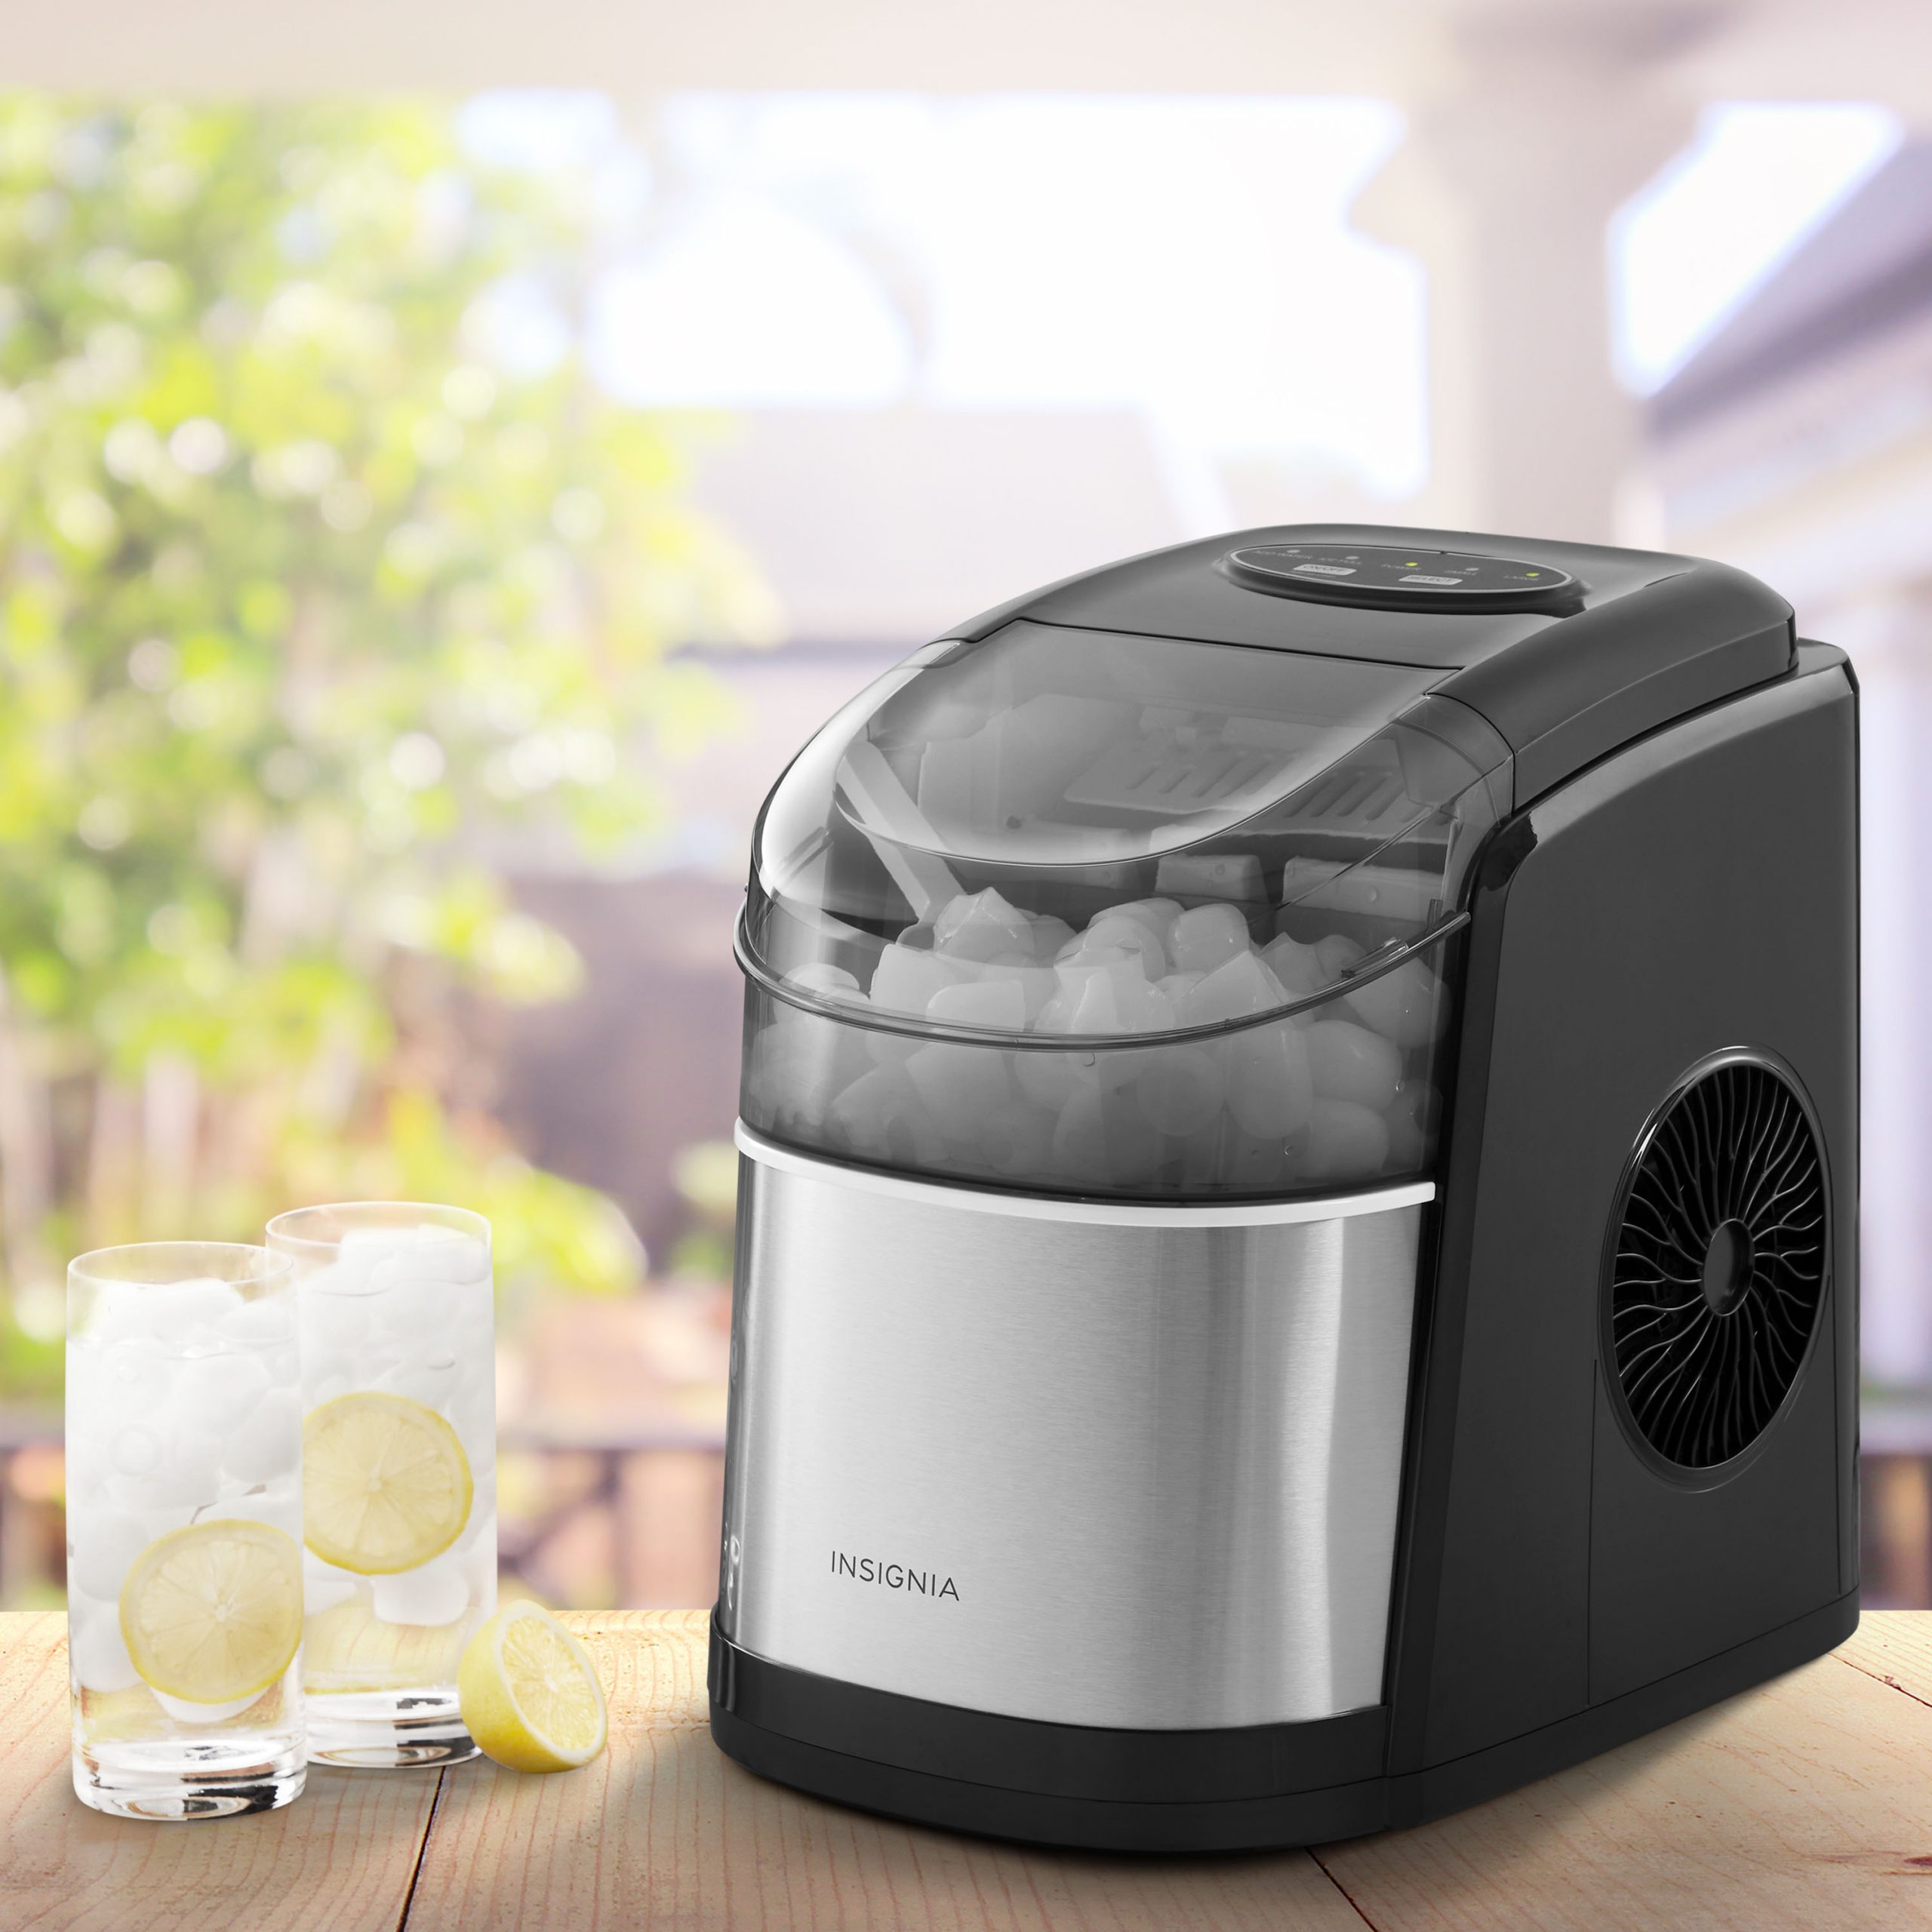 Insignia™ - Portable Icemaker 33 lb. With Auto Shut-Off - Stainless Steel  $119.99 Shipped